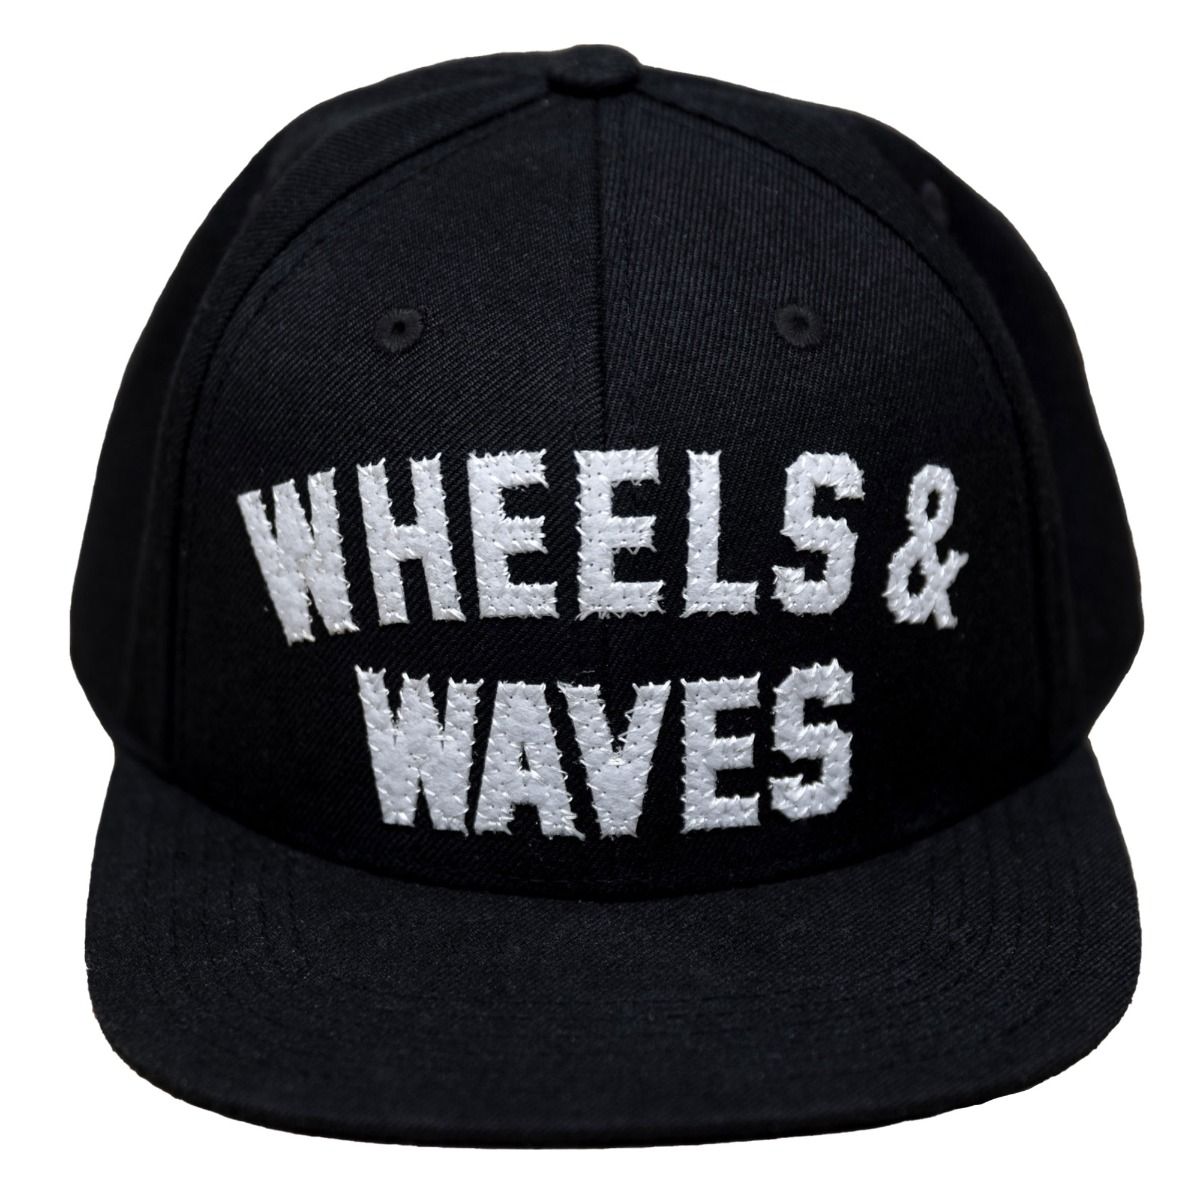 Wheels and Waves Thunder Cap in Black